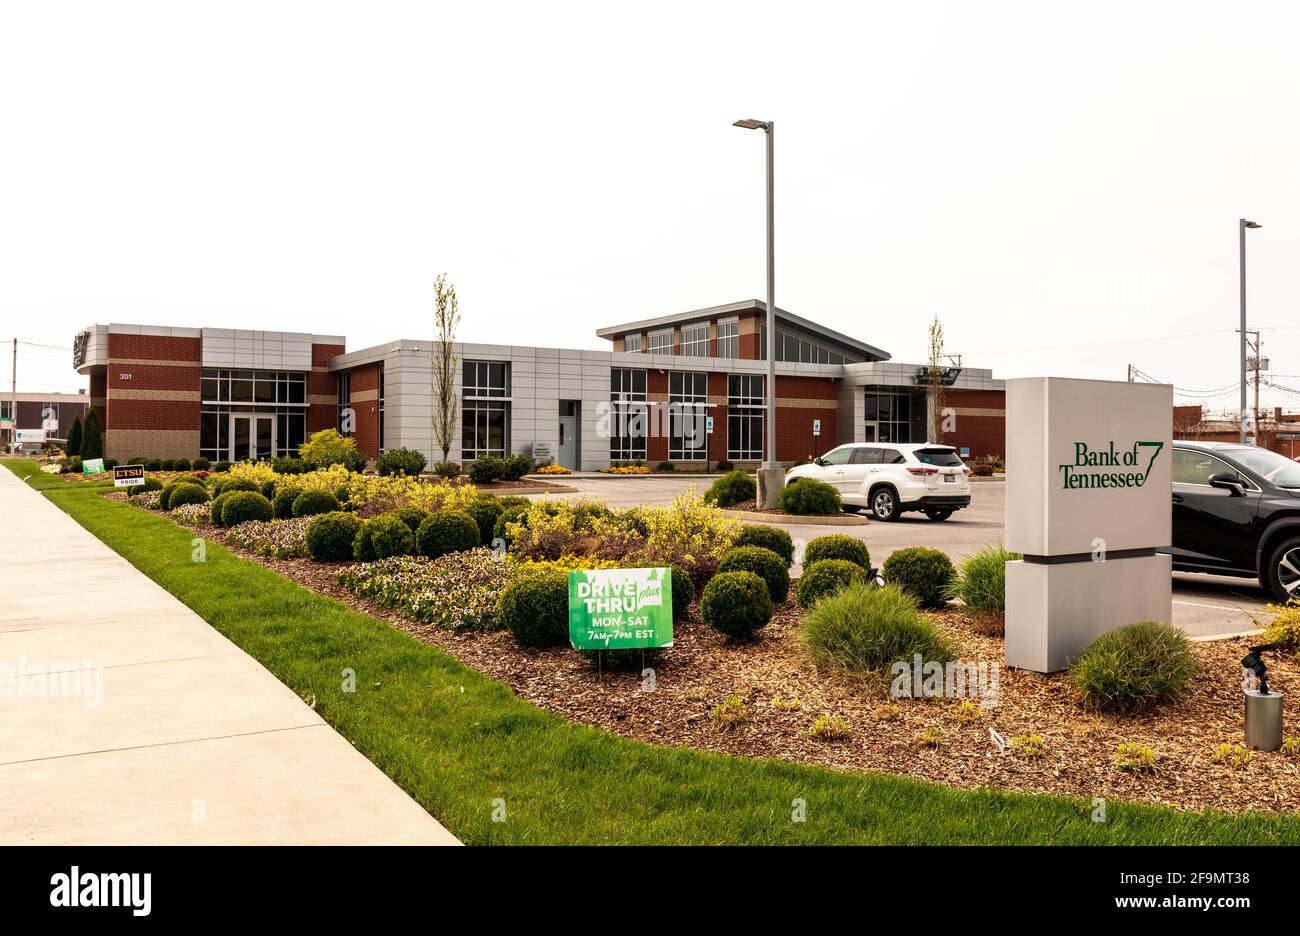 KINGSPORT, TN, USA--8 APRIL 2021: A branch of the Bank of Tennessee, showing street sign, building and parking lot. Stock Photo